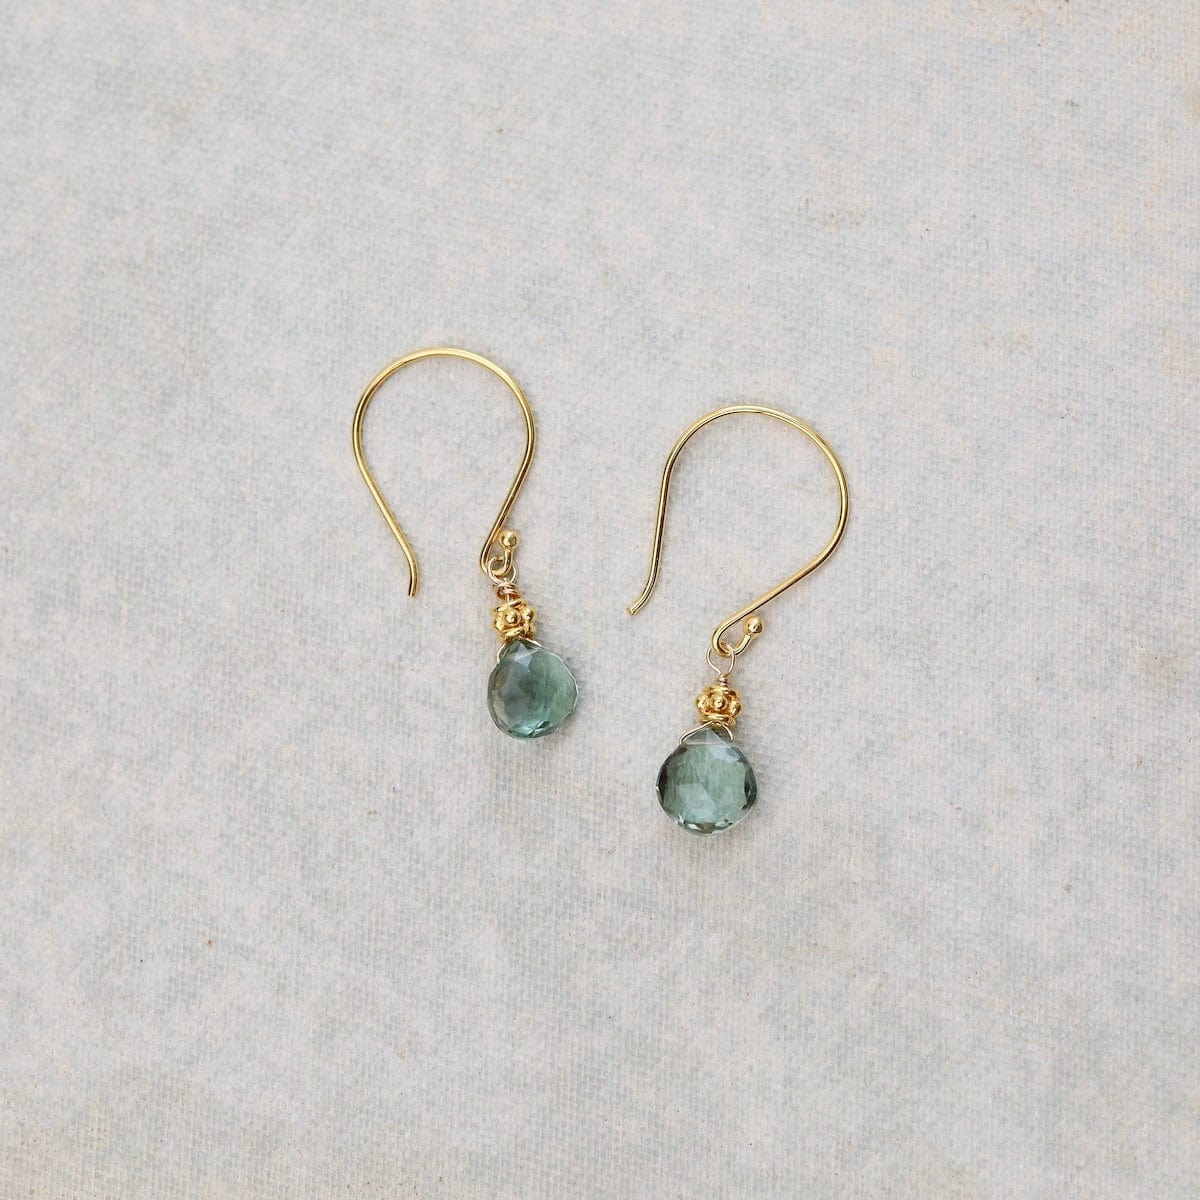 Load image into Gallery viewer, ear-gf Tiny Green Quartz Earrings
